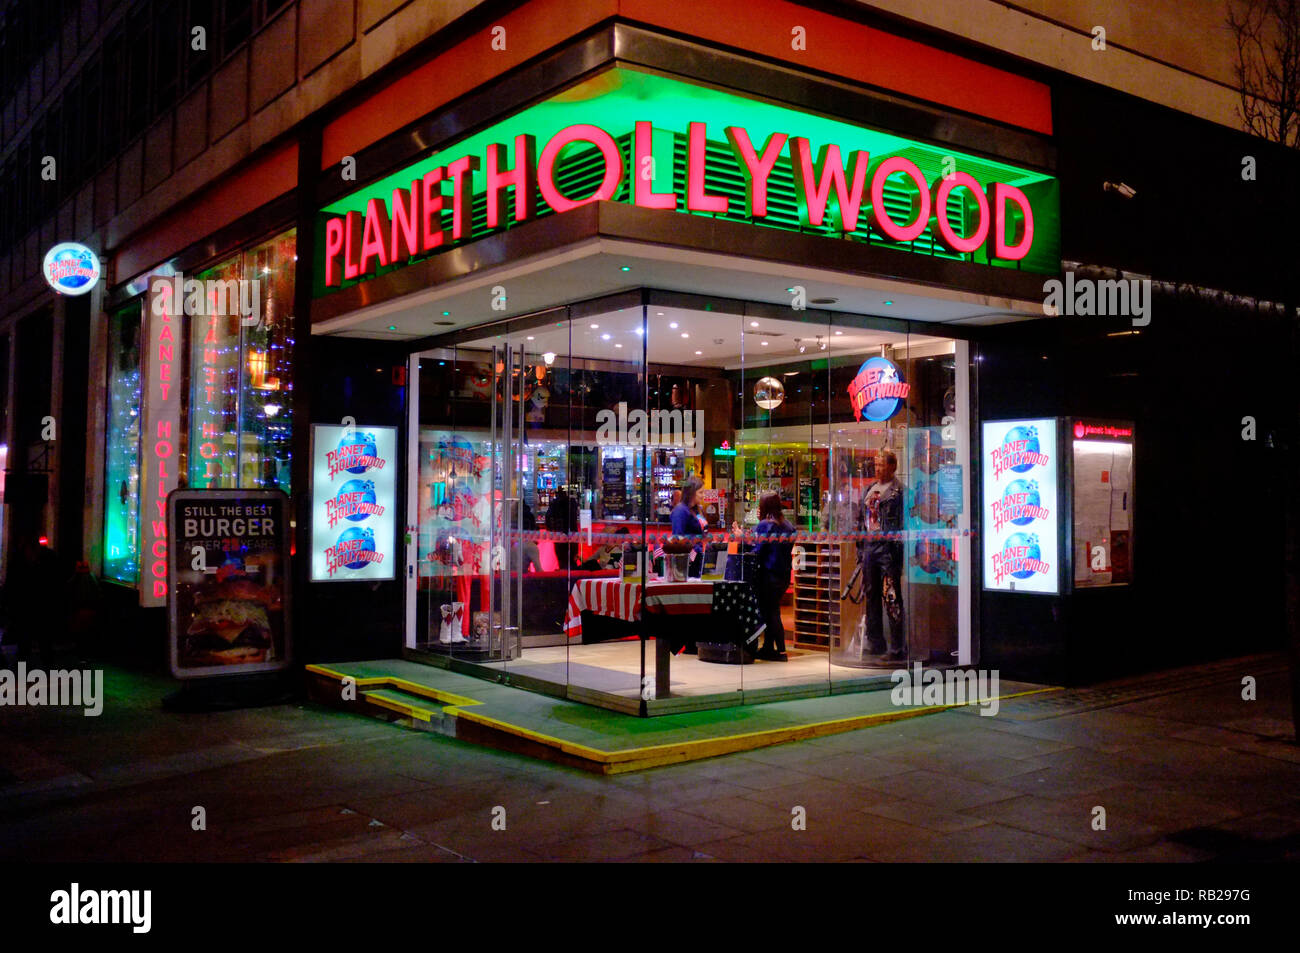 exterior view of planet hollywood, haymarket, st james , london, uk Stock Photo